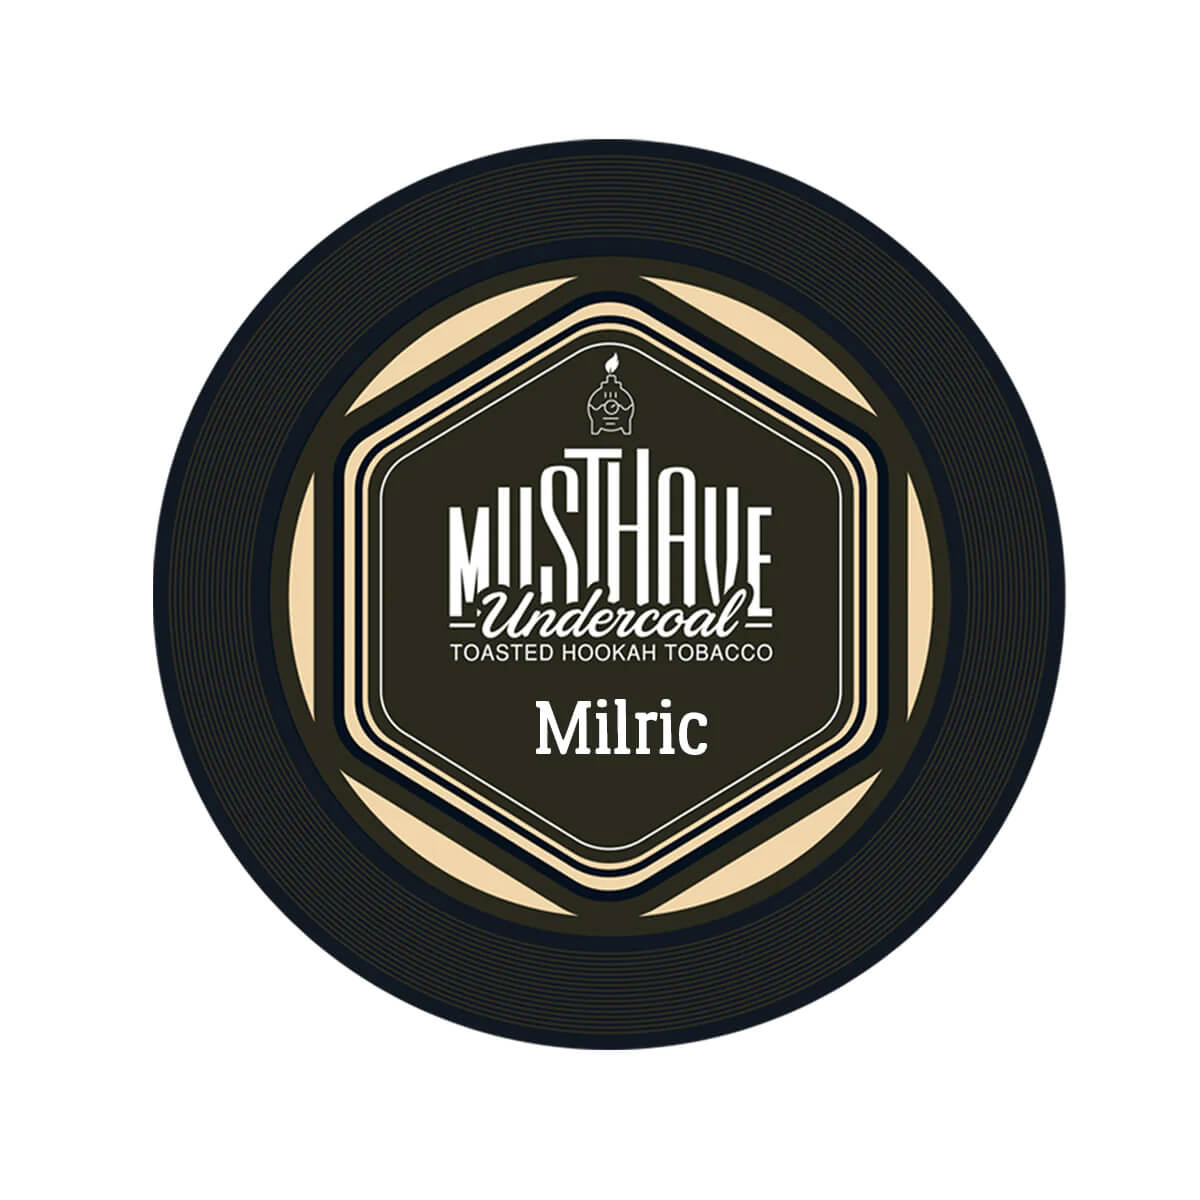 Musthave Tabak Milric 25g